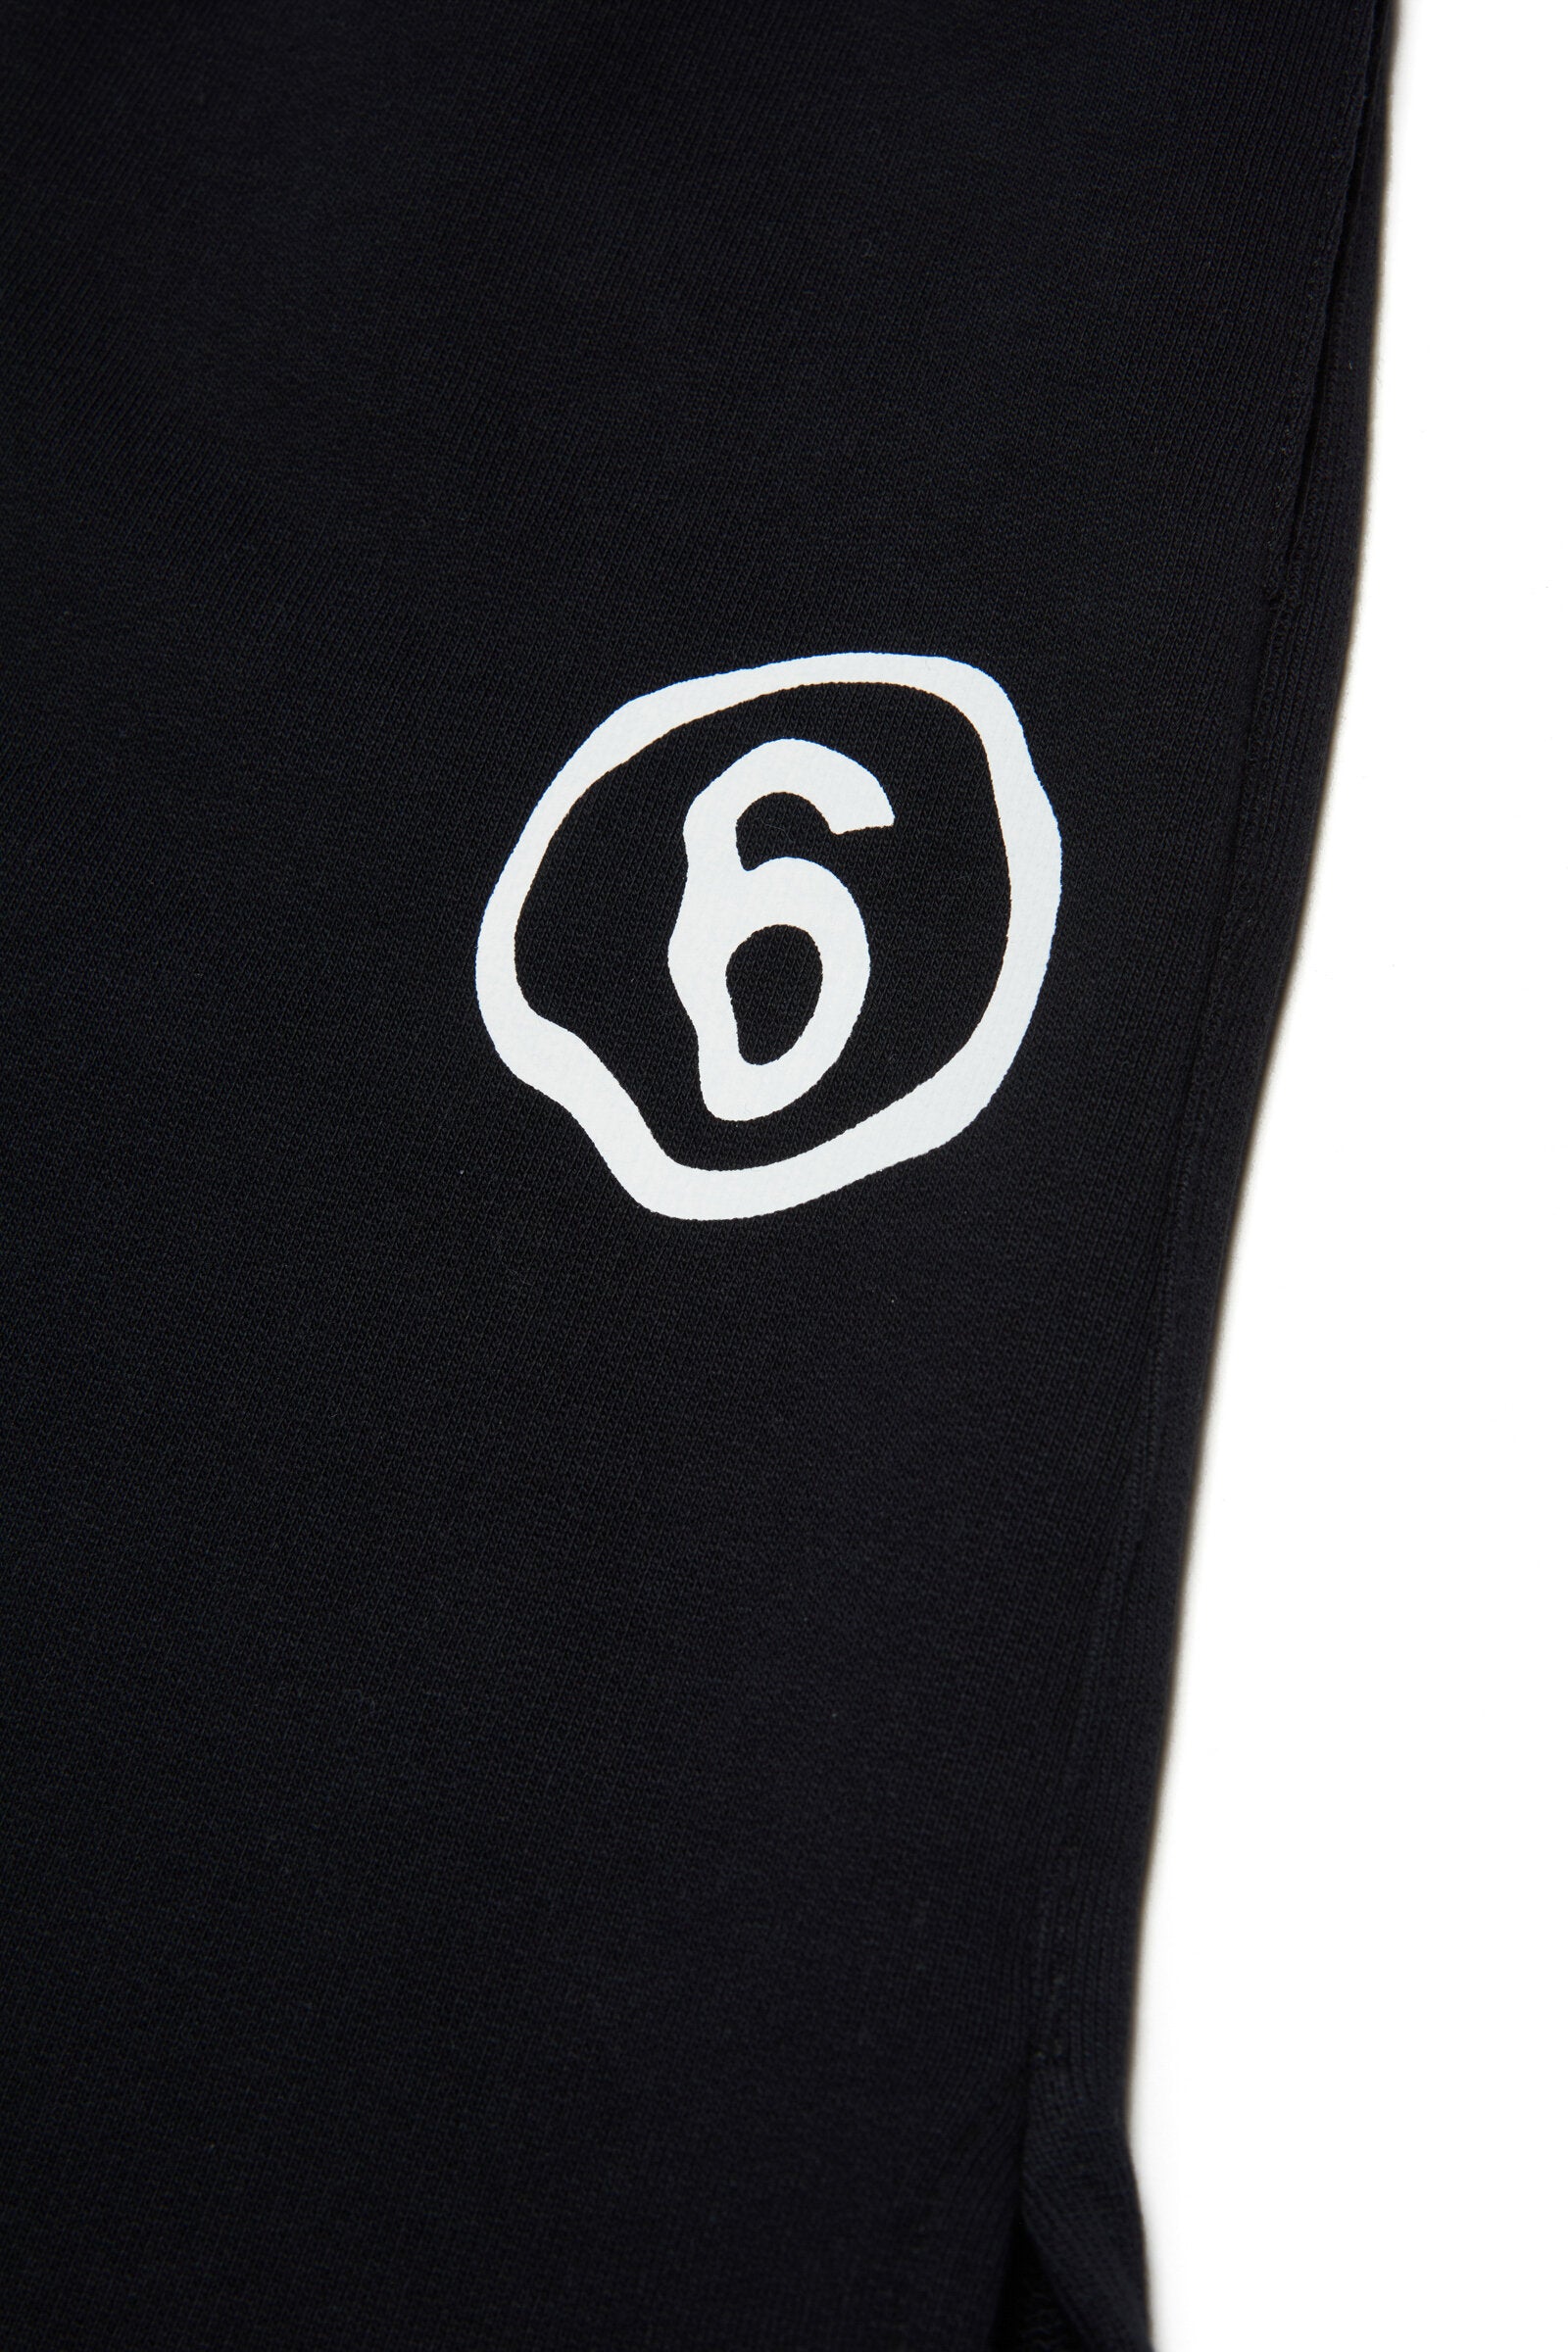 Black fleece shorts with rounded edges and logo